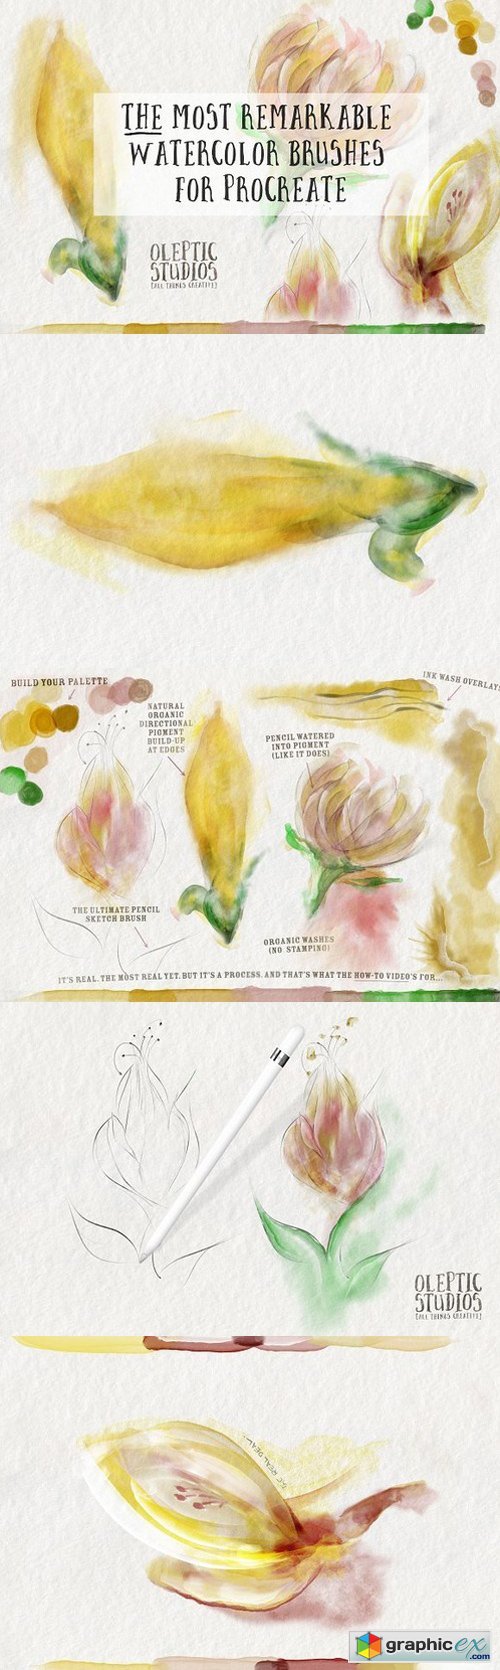 Best Watercolor Brushes � Procreate